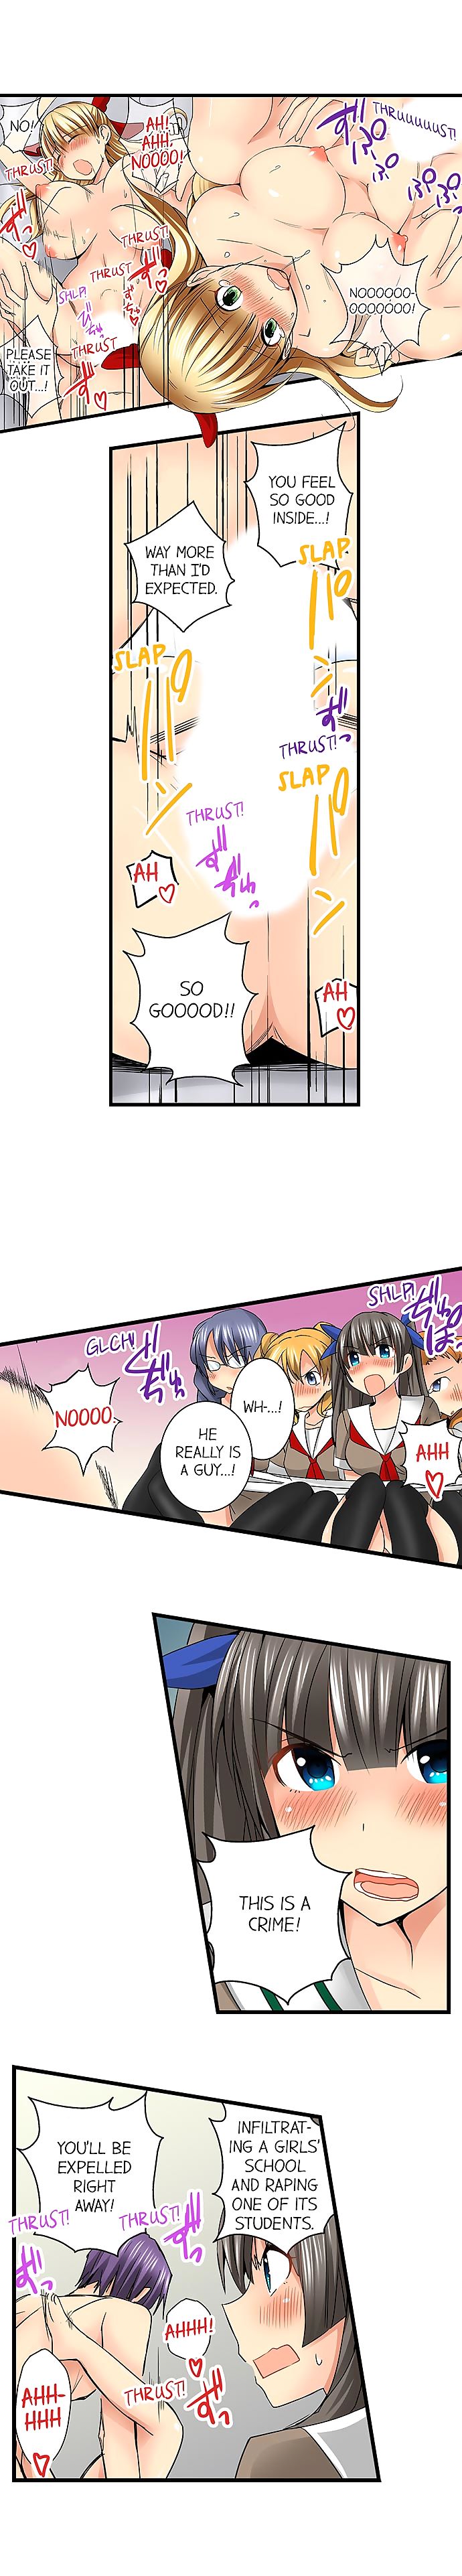 Sneaked Into A Horny Girls School Chapter 18-30 - part 5